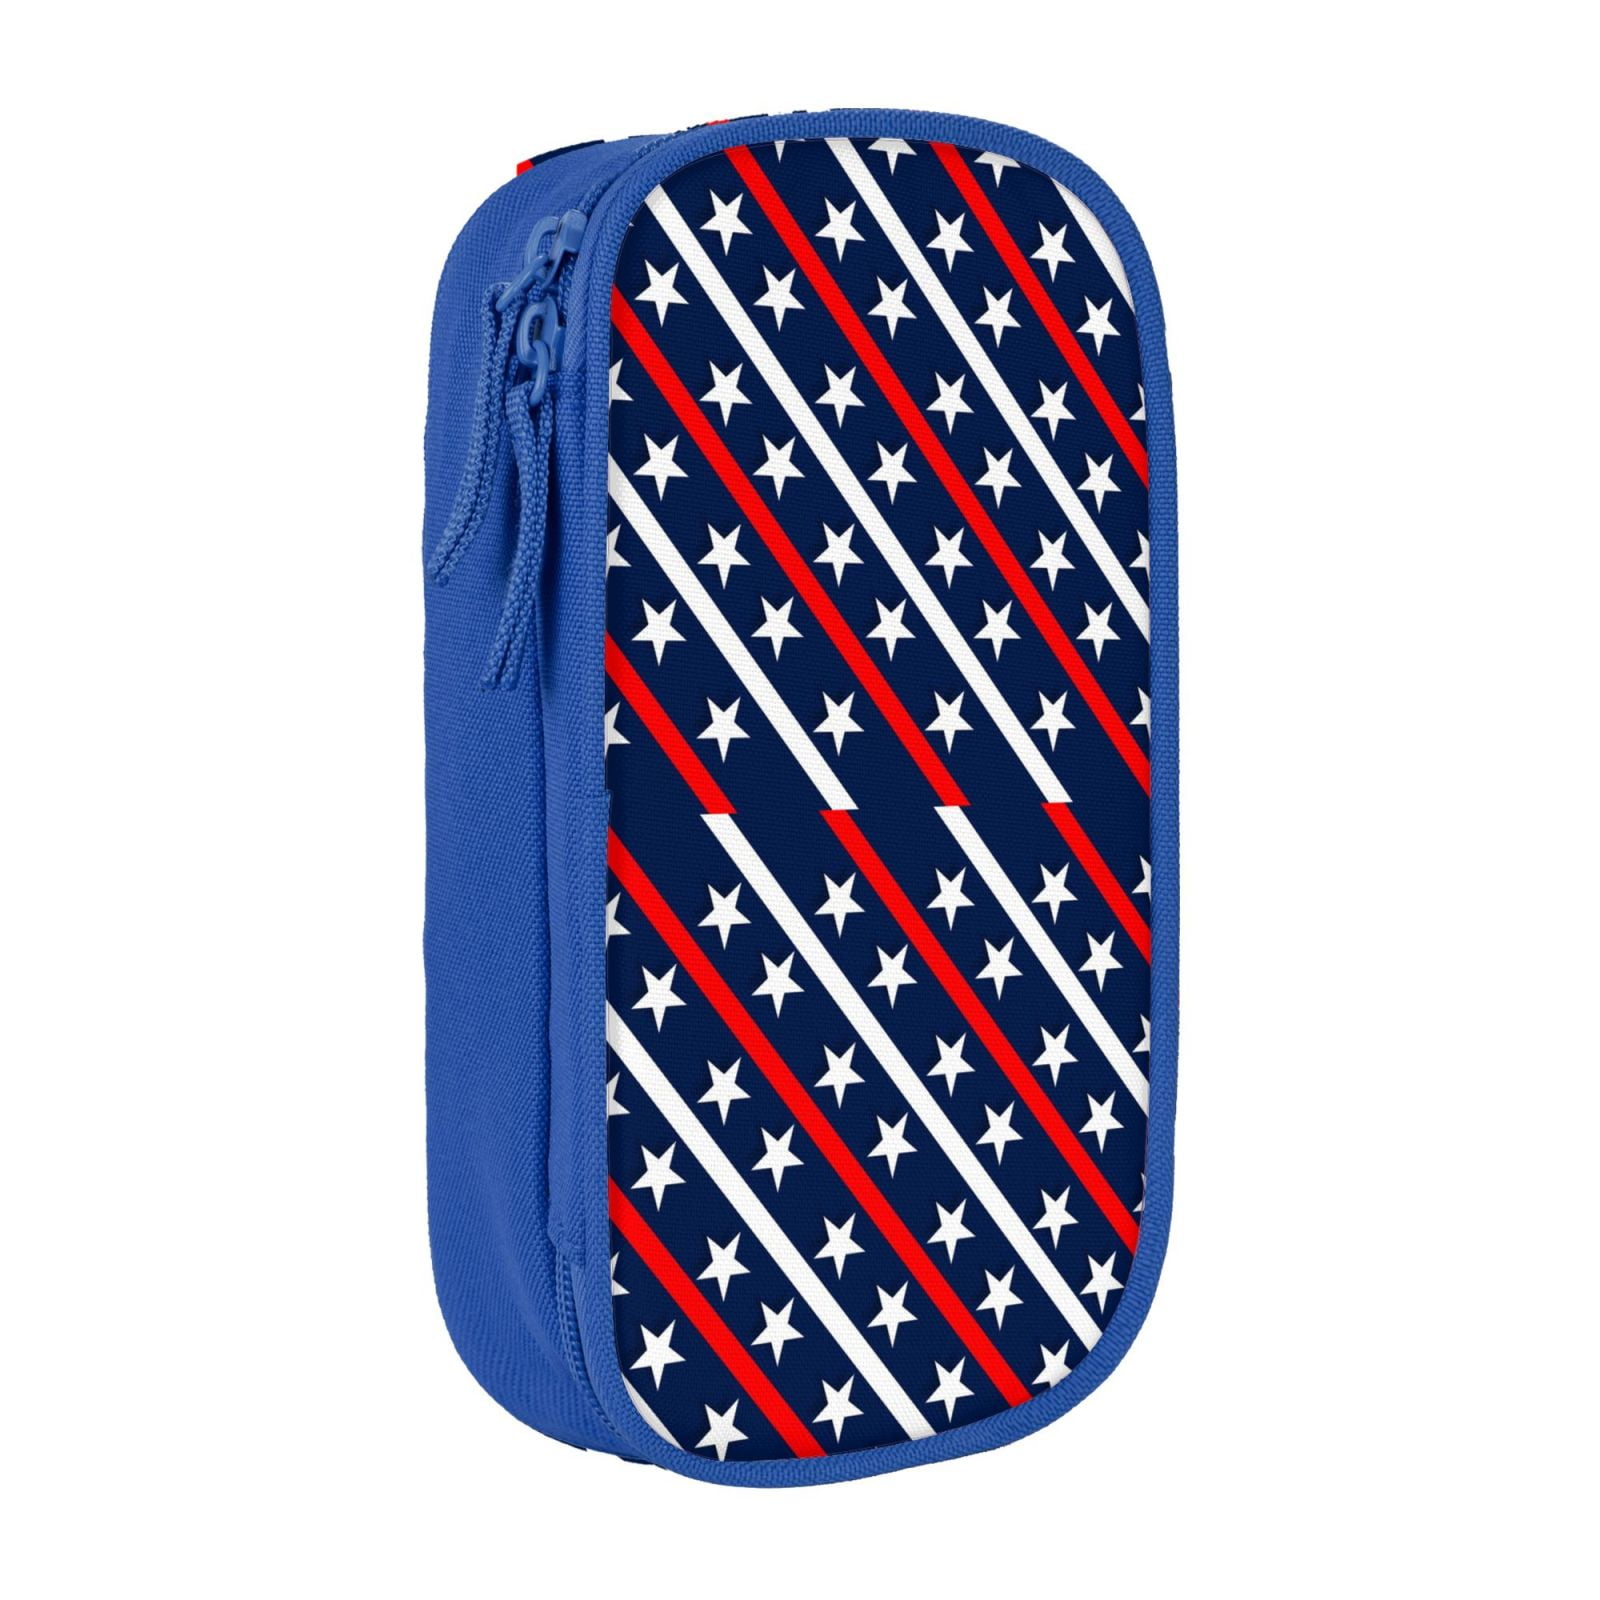 XMXY Patriotic Red White Blue Pencil Pencil Stars Large Strips Capacity Case, Compartments Bags Zipper Blue with Portable